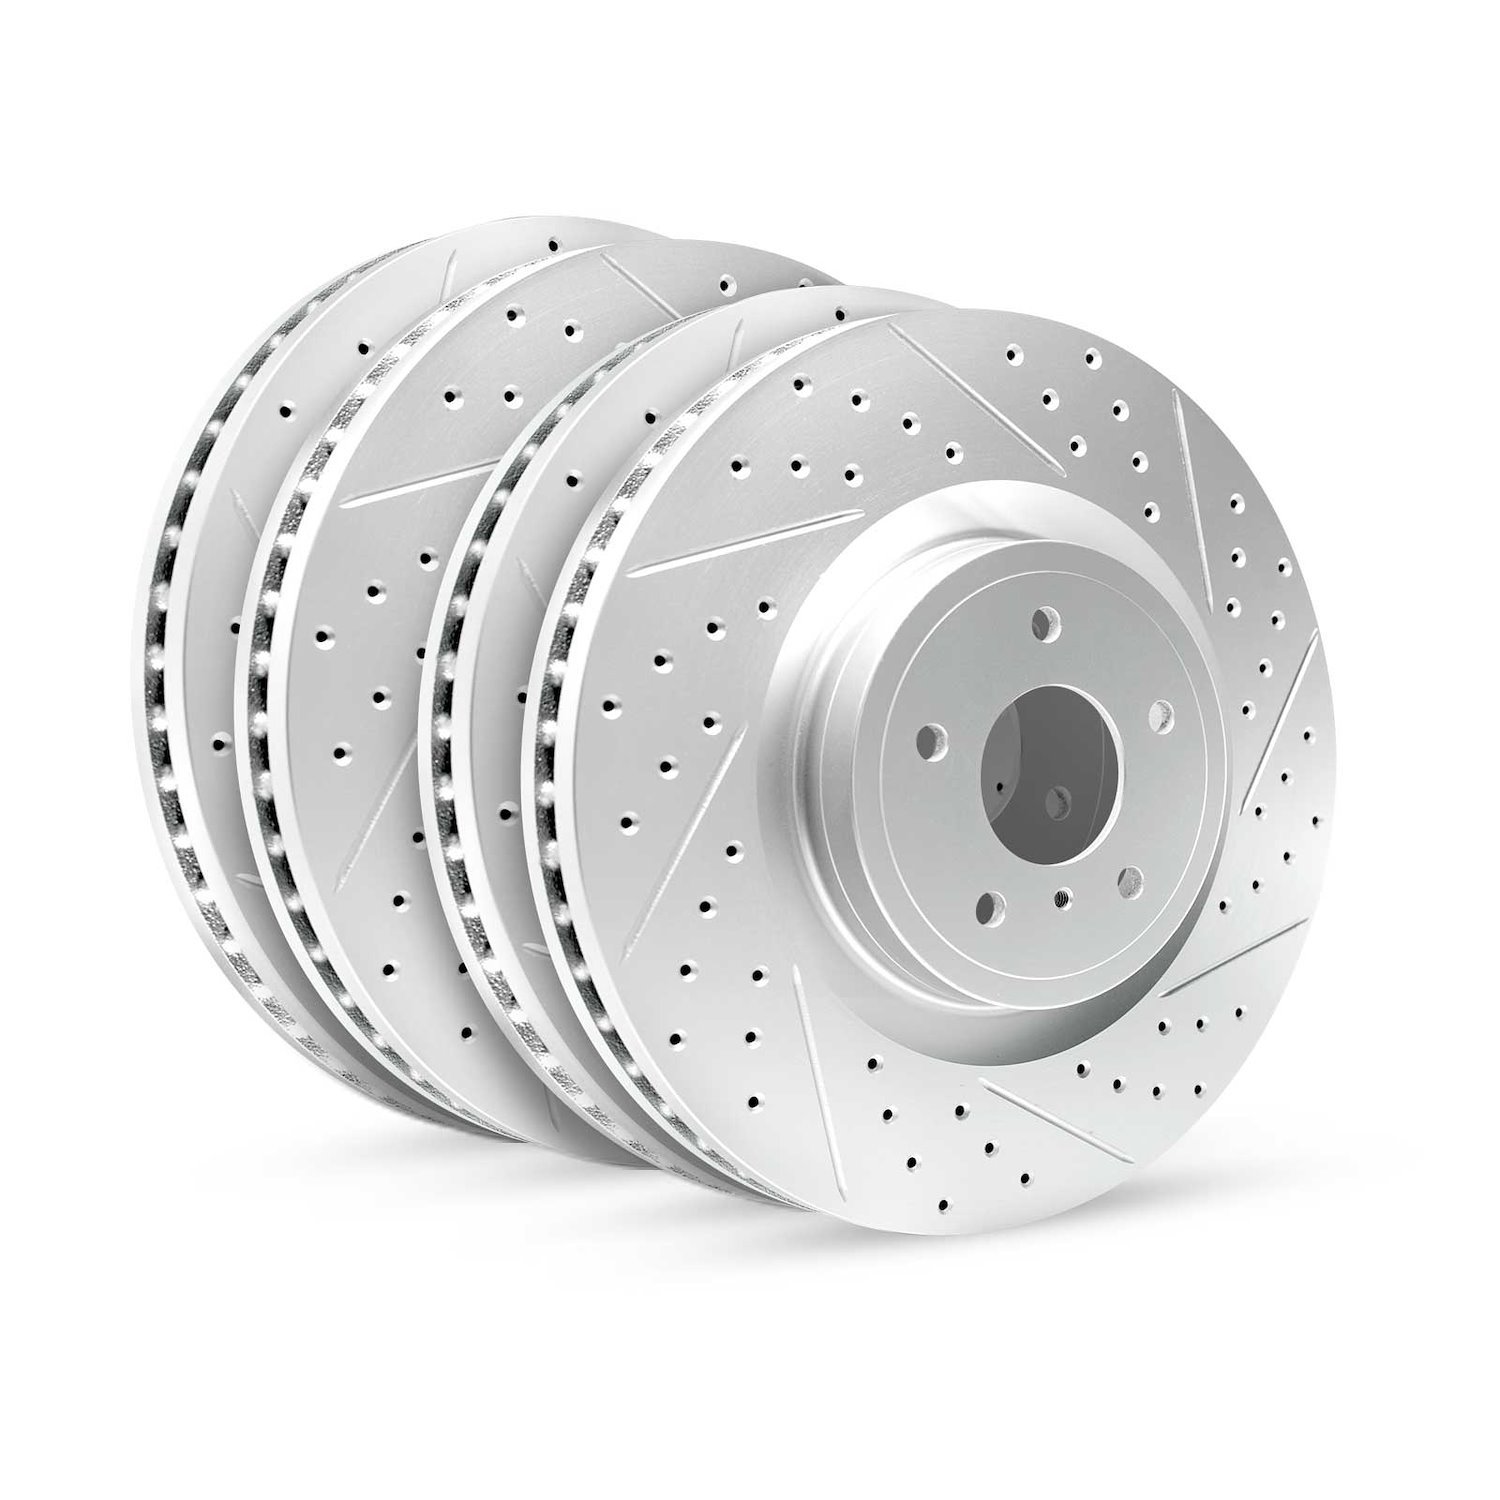 GEO-Carbon Drilled/Slotted Rotors, 2005-2014 Infiniti/Nissan, Position: Front/Rear